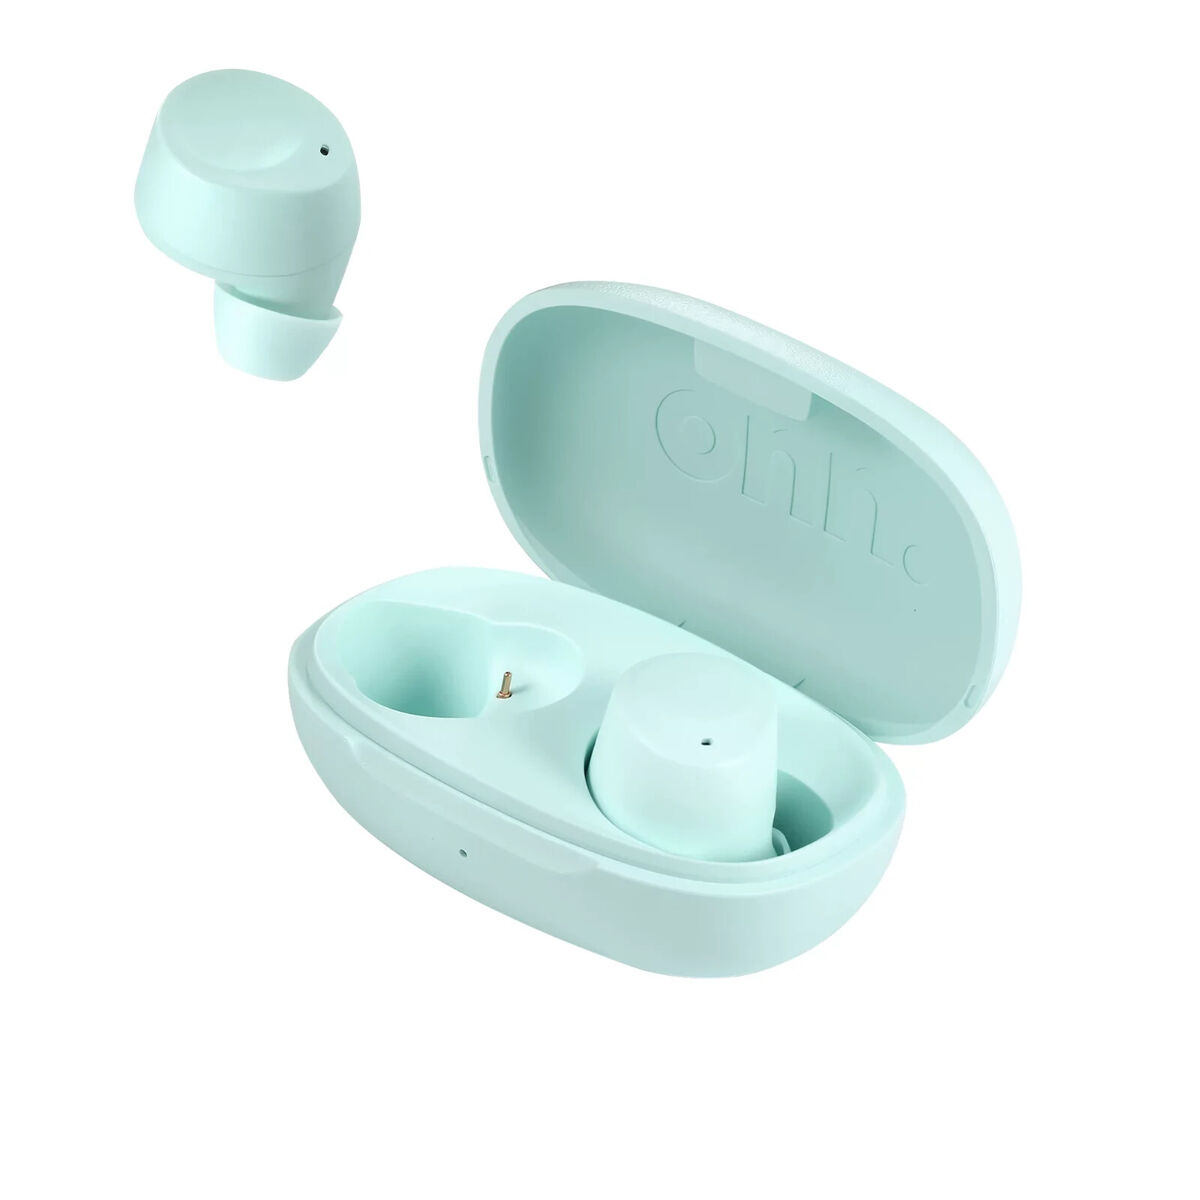 Onn Earbuds Harmony: Connecting Bluetooth Earbuds To IPhone